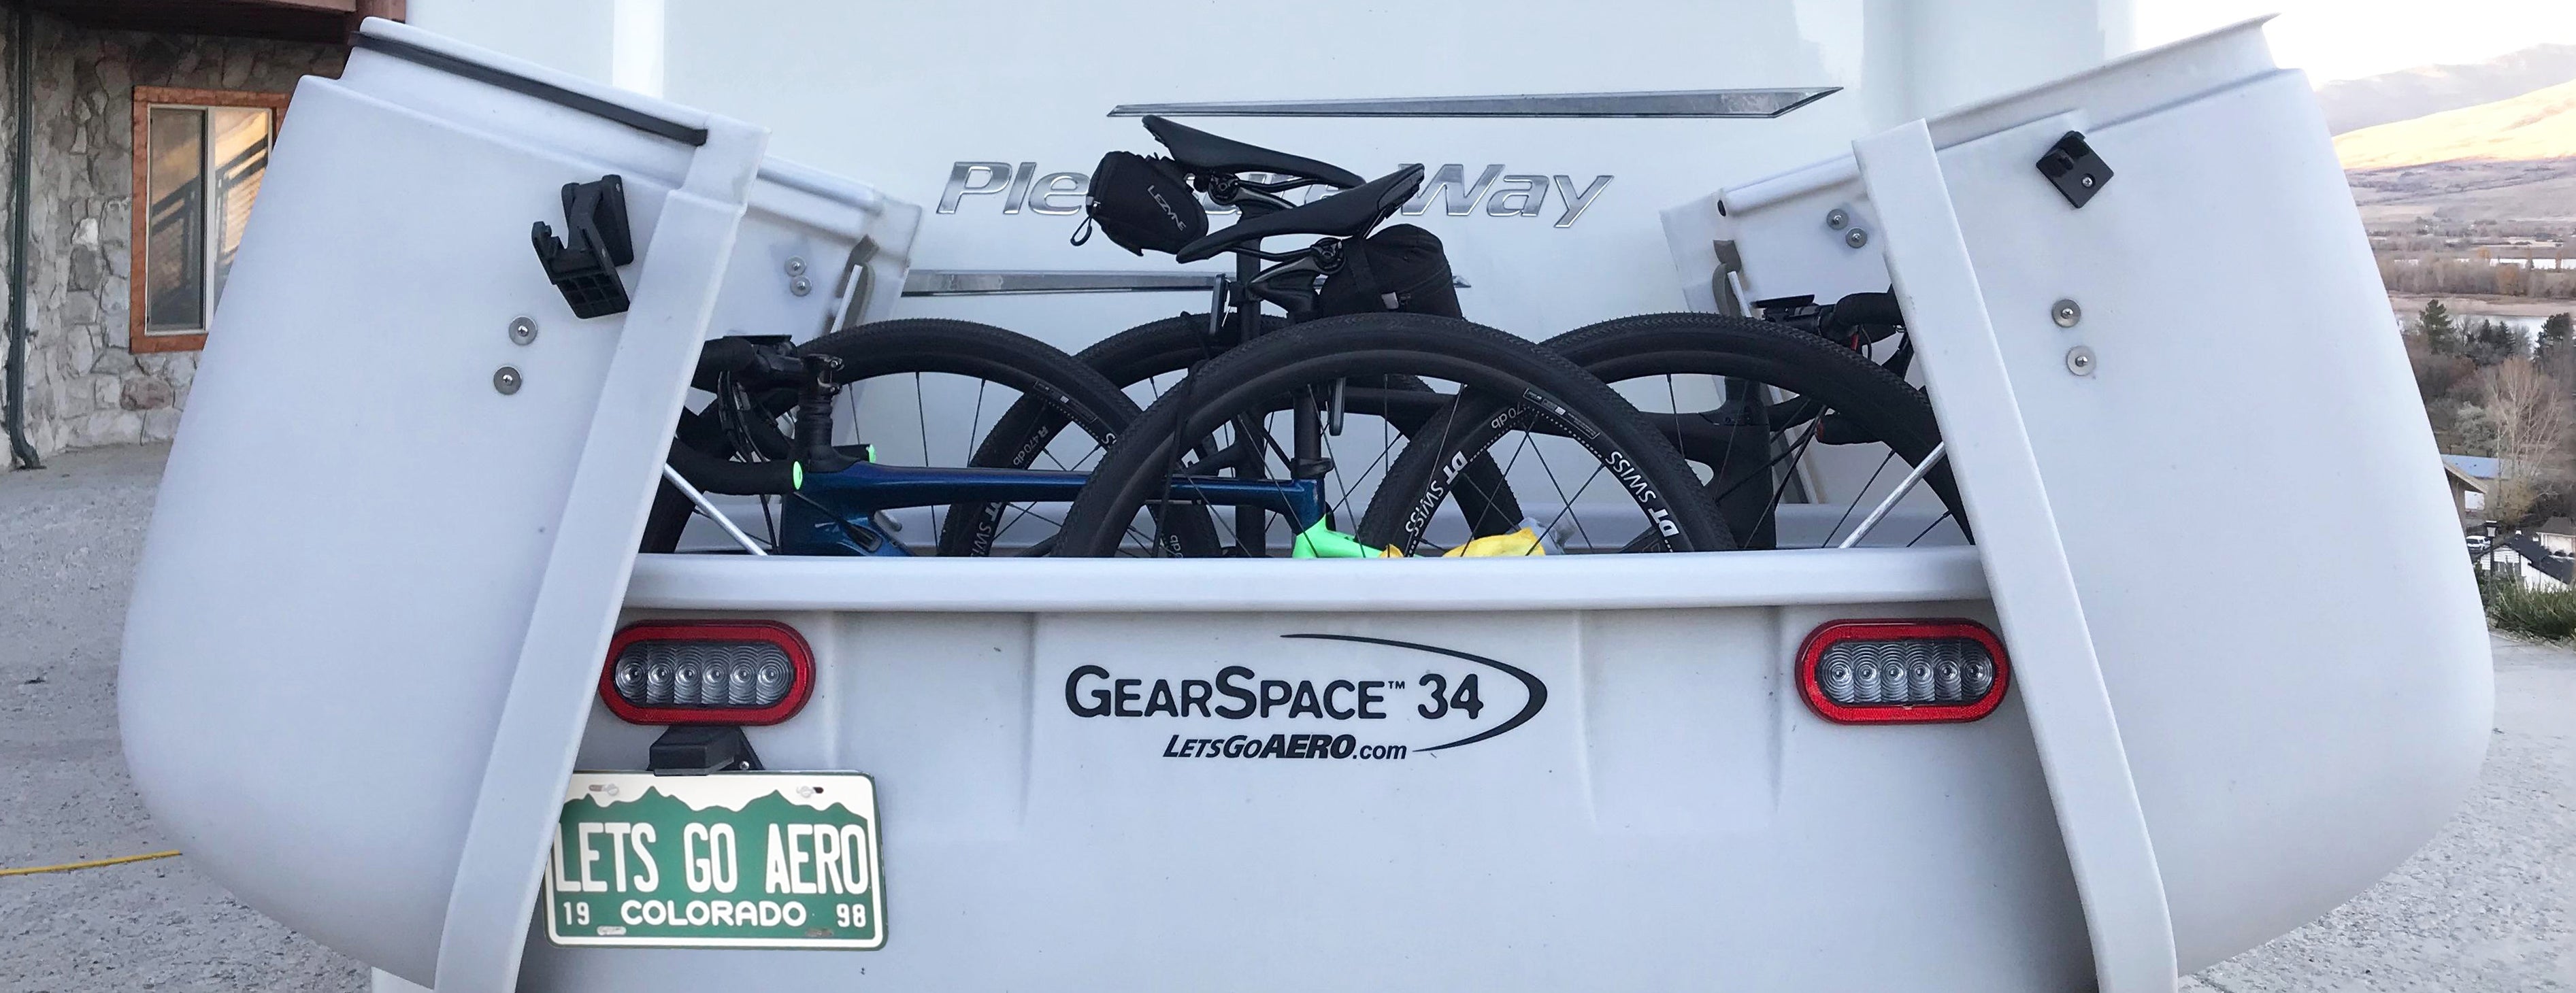 GearSpace Cargo Carrier on Pleasure Way with Bikes